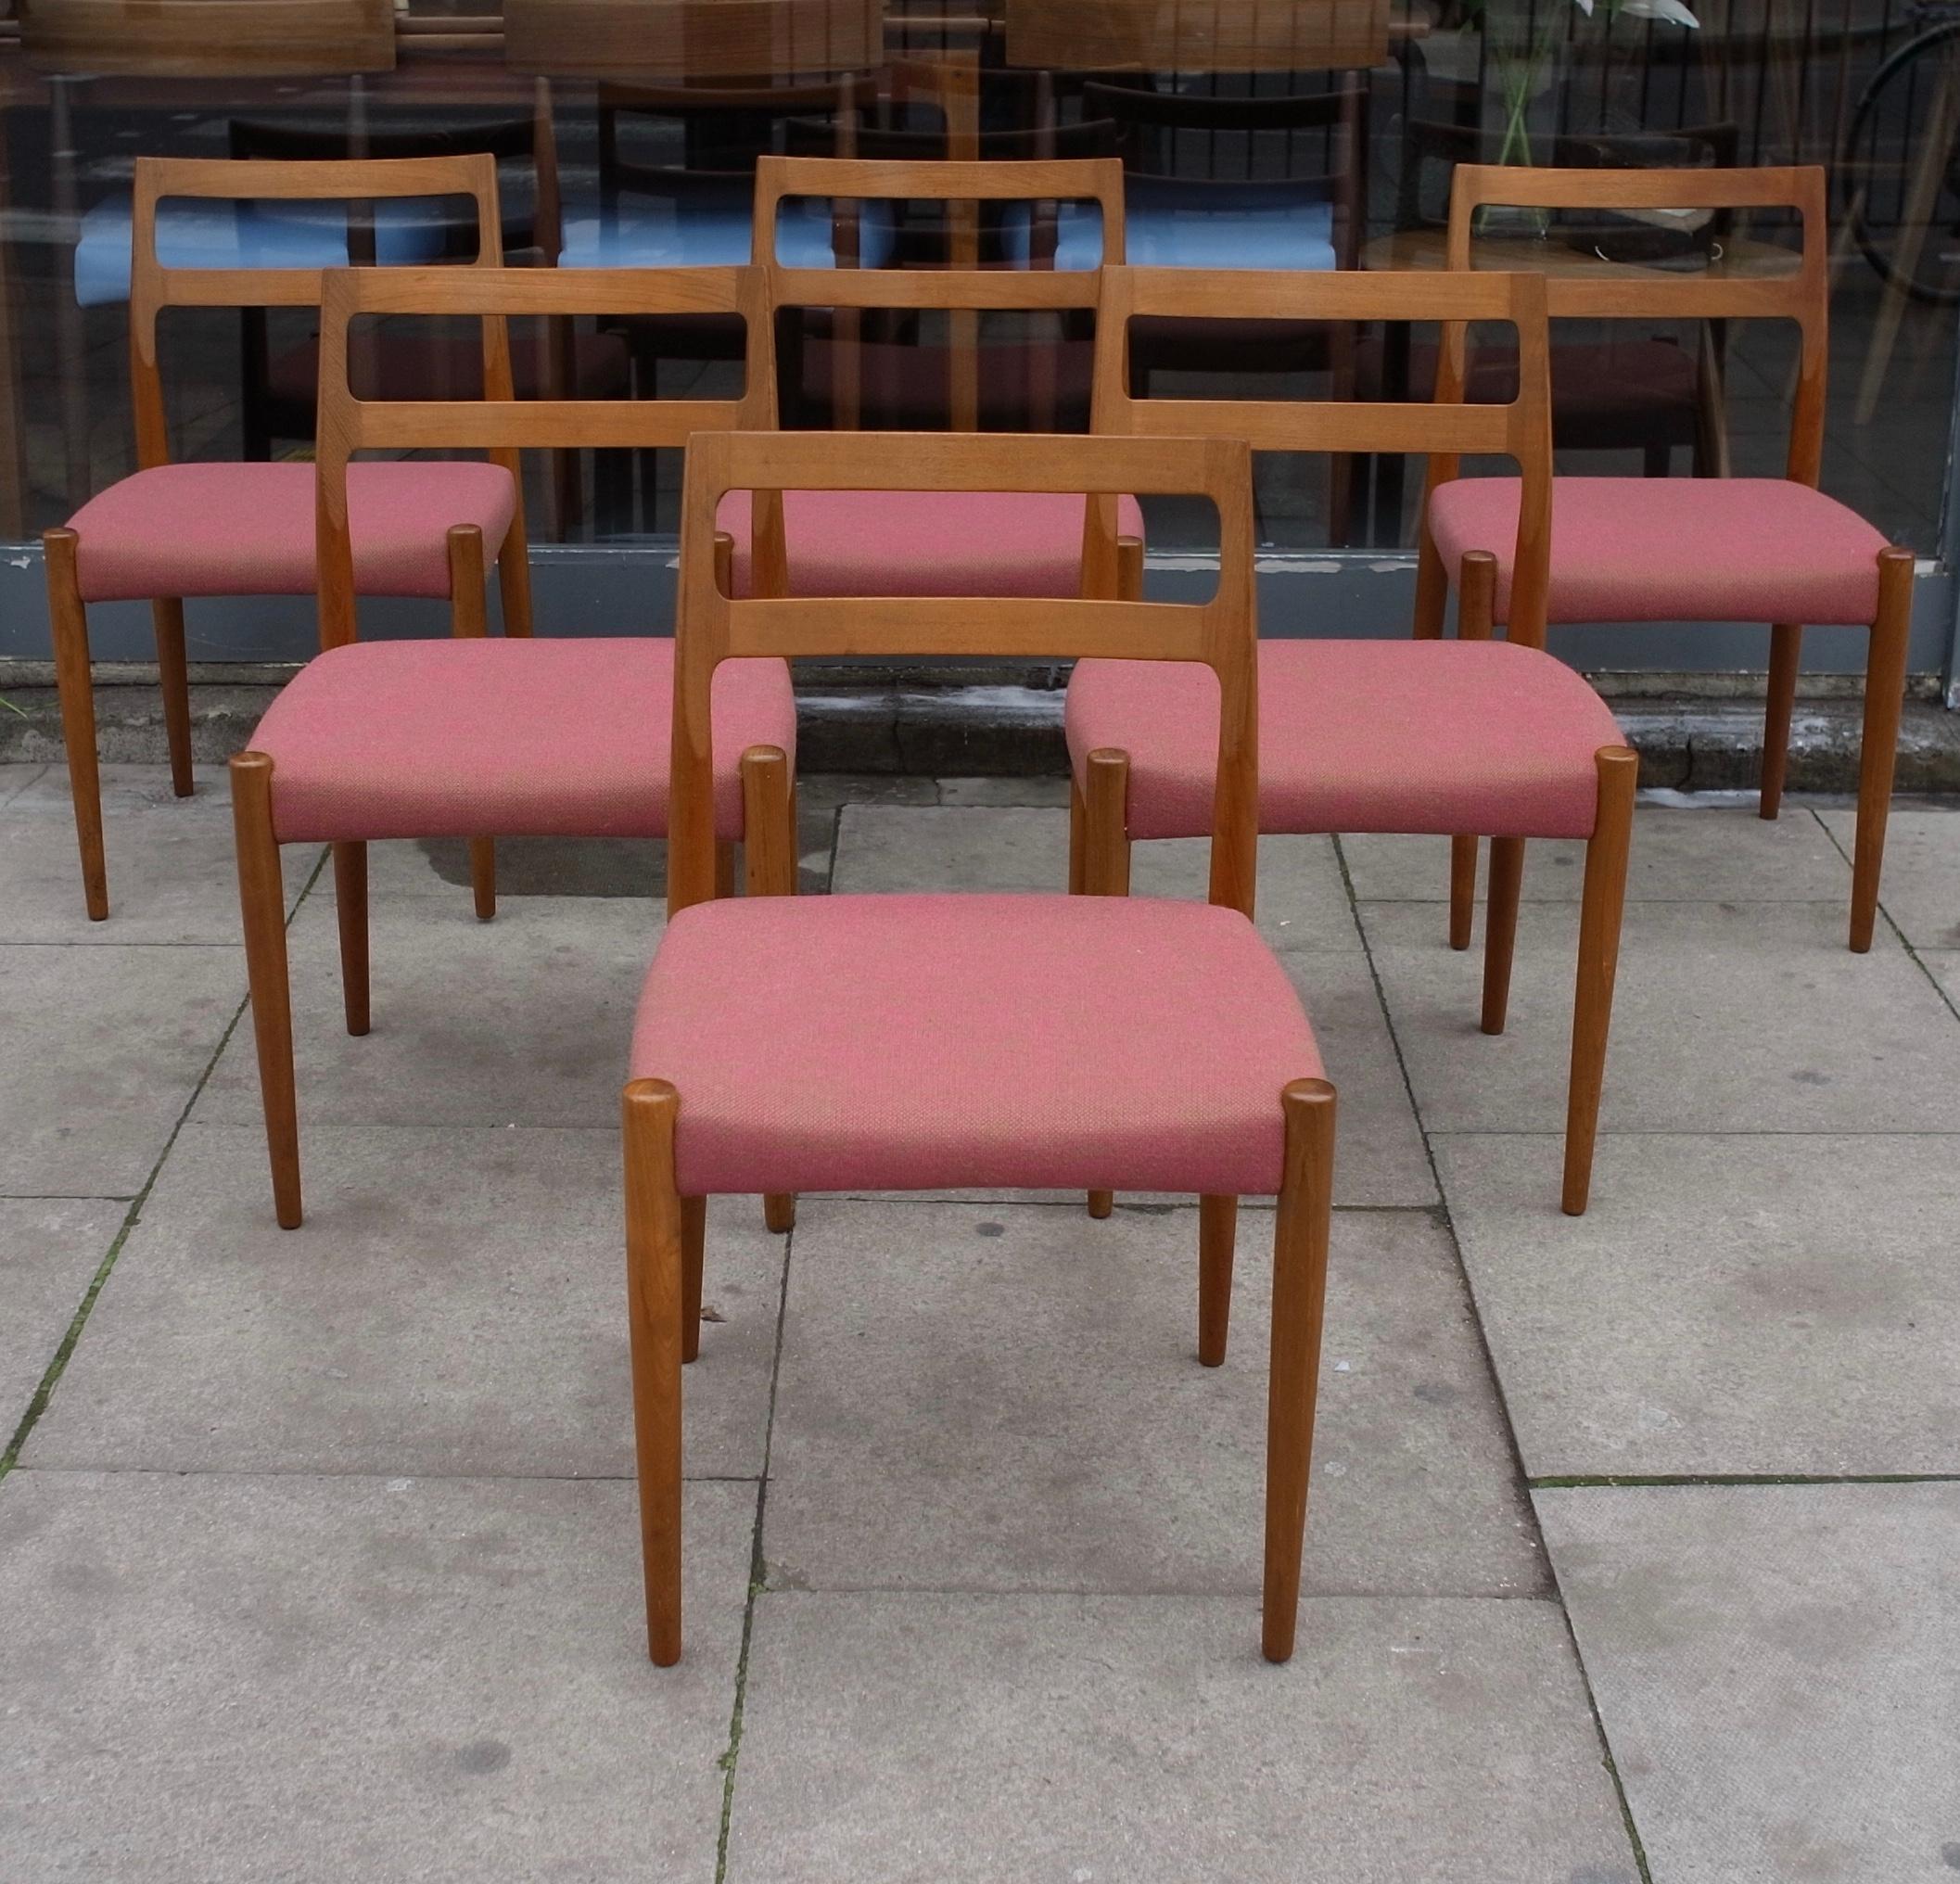 A very stylish, elegant and rare set of six 1960s Danish dining chairs, designed by Johannes Andersen and produced by Uldum Mobelfabrik. Created in solid Teak, and recovered in a redis pink coloured, quality textile. These classic and high quality